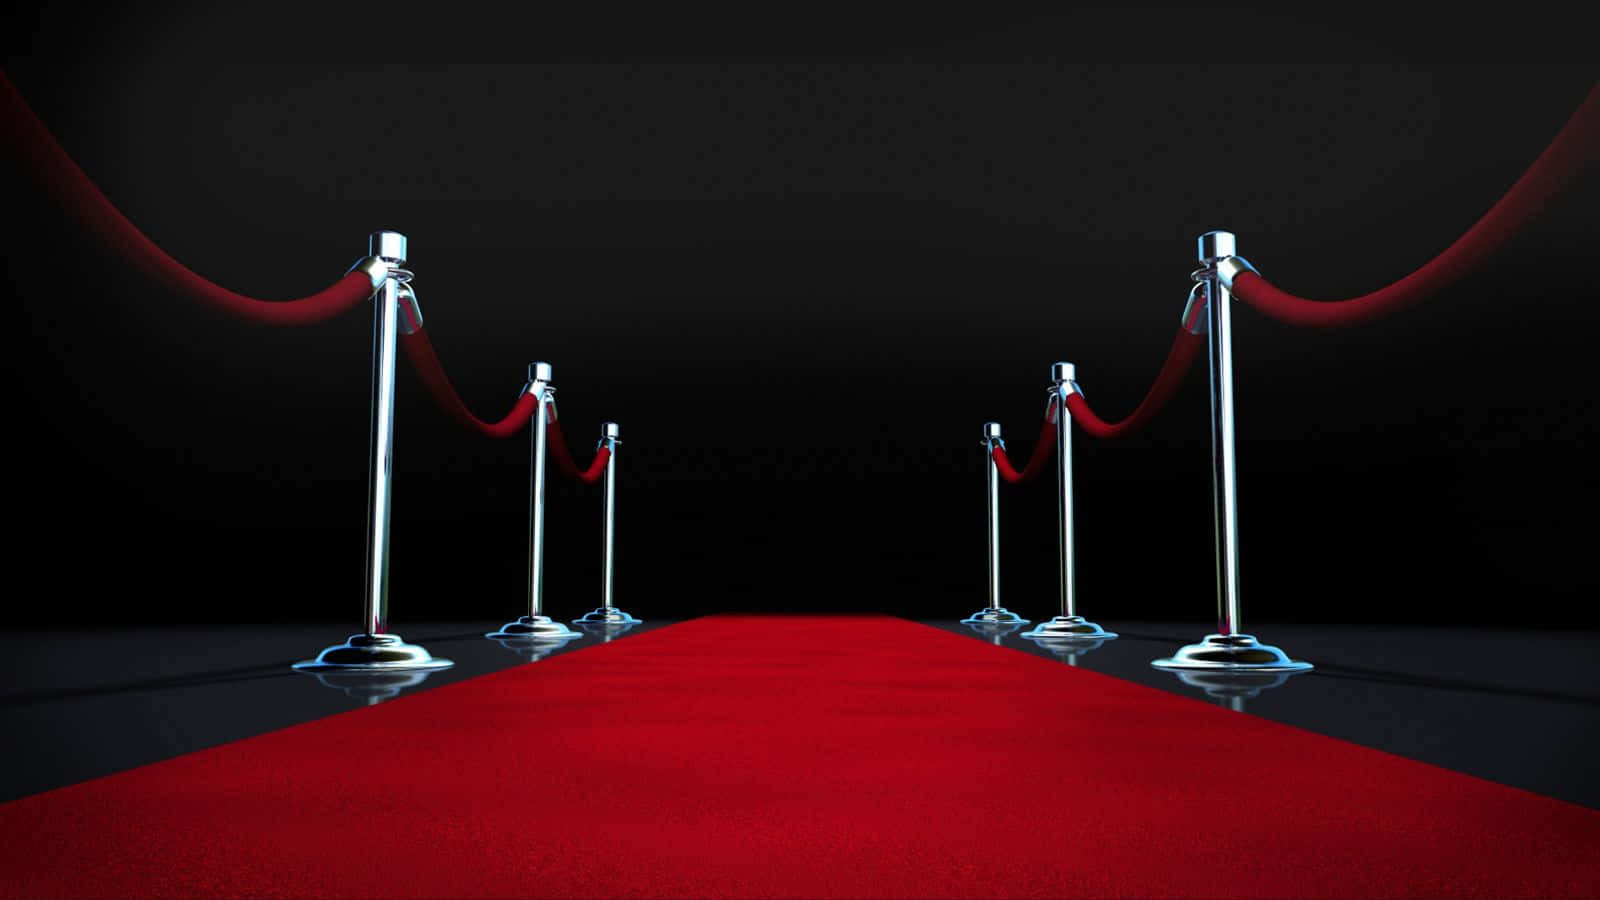 “Striking red carpet illuminated with dazzling lights”